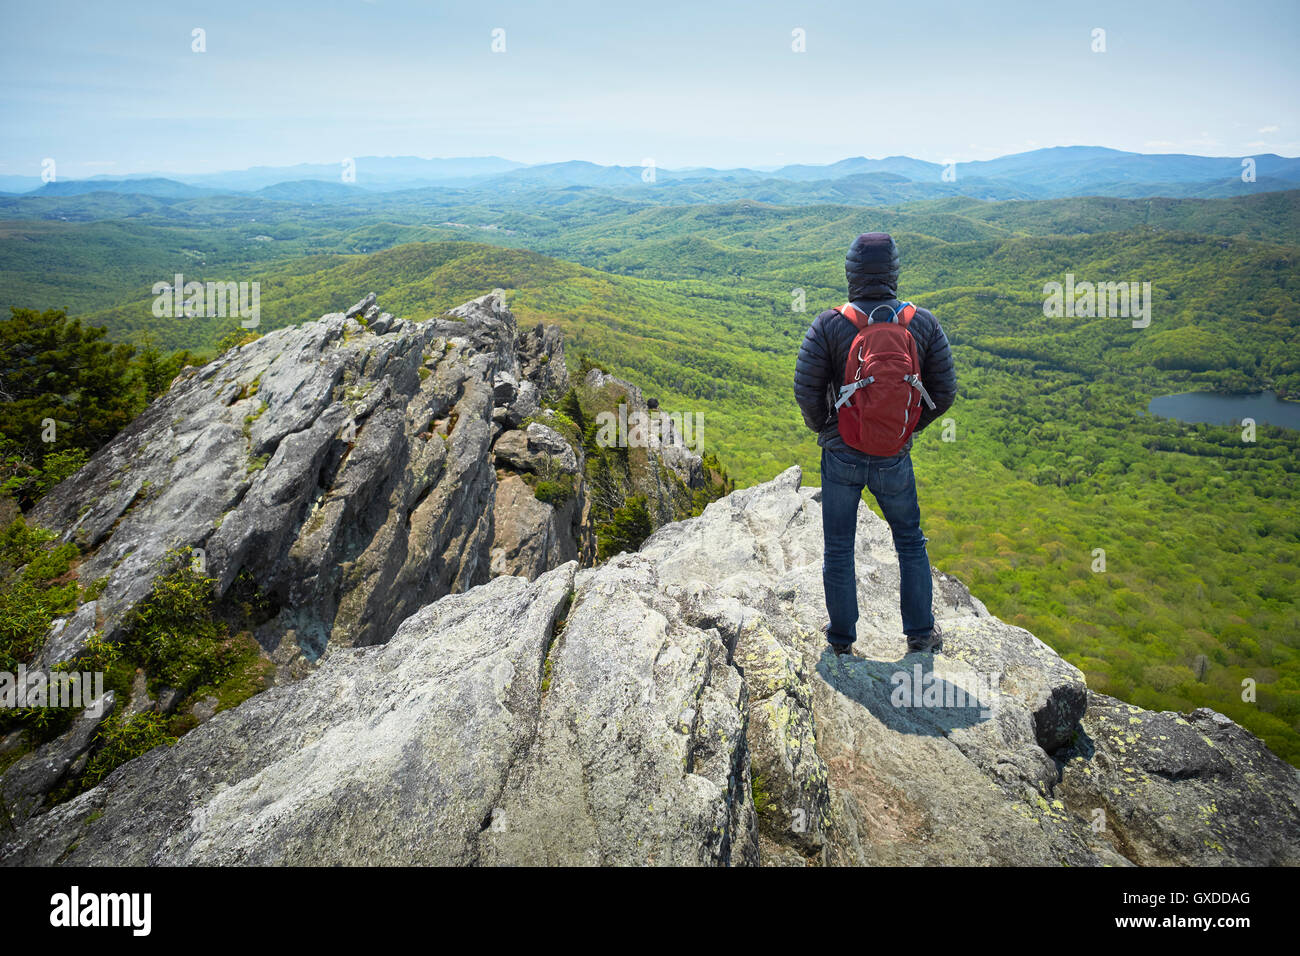 Rear view of male hiker looking out from ridge, Blue Ridge Mountains, North Carolina, USA Stock Photo